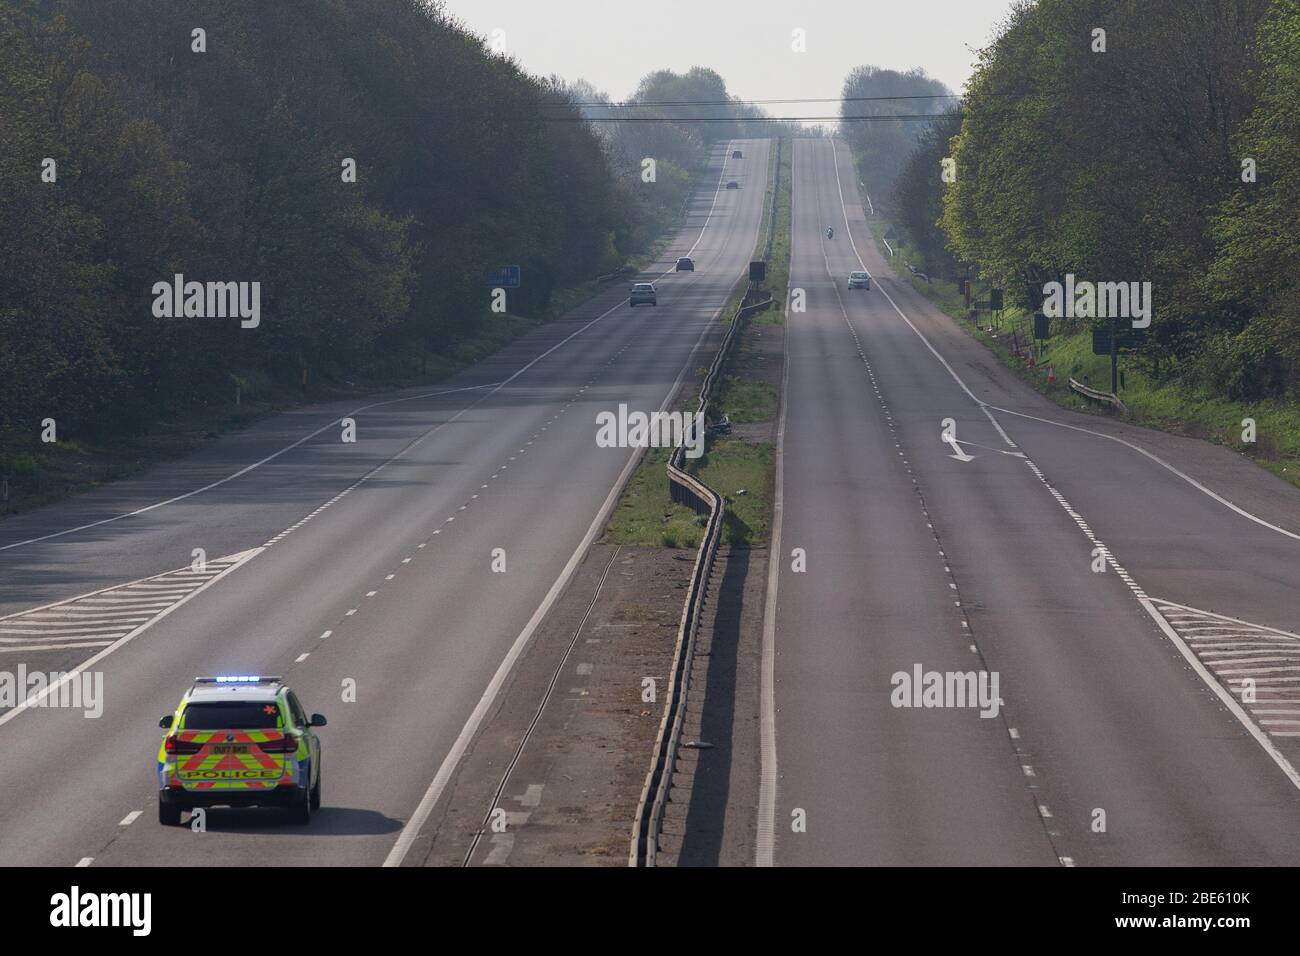 Very quiet, almost deserted A! motorway at junction 7 Stevenage during Coronavirus lockdown in UK featuring police car Stock Photo